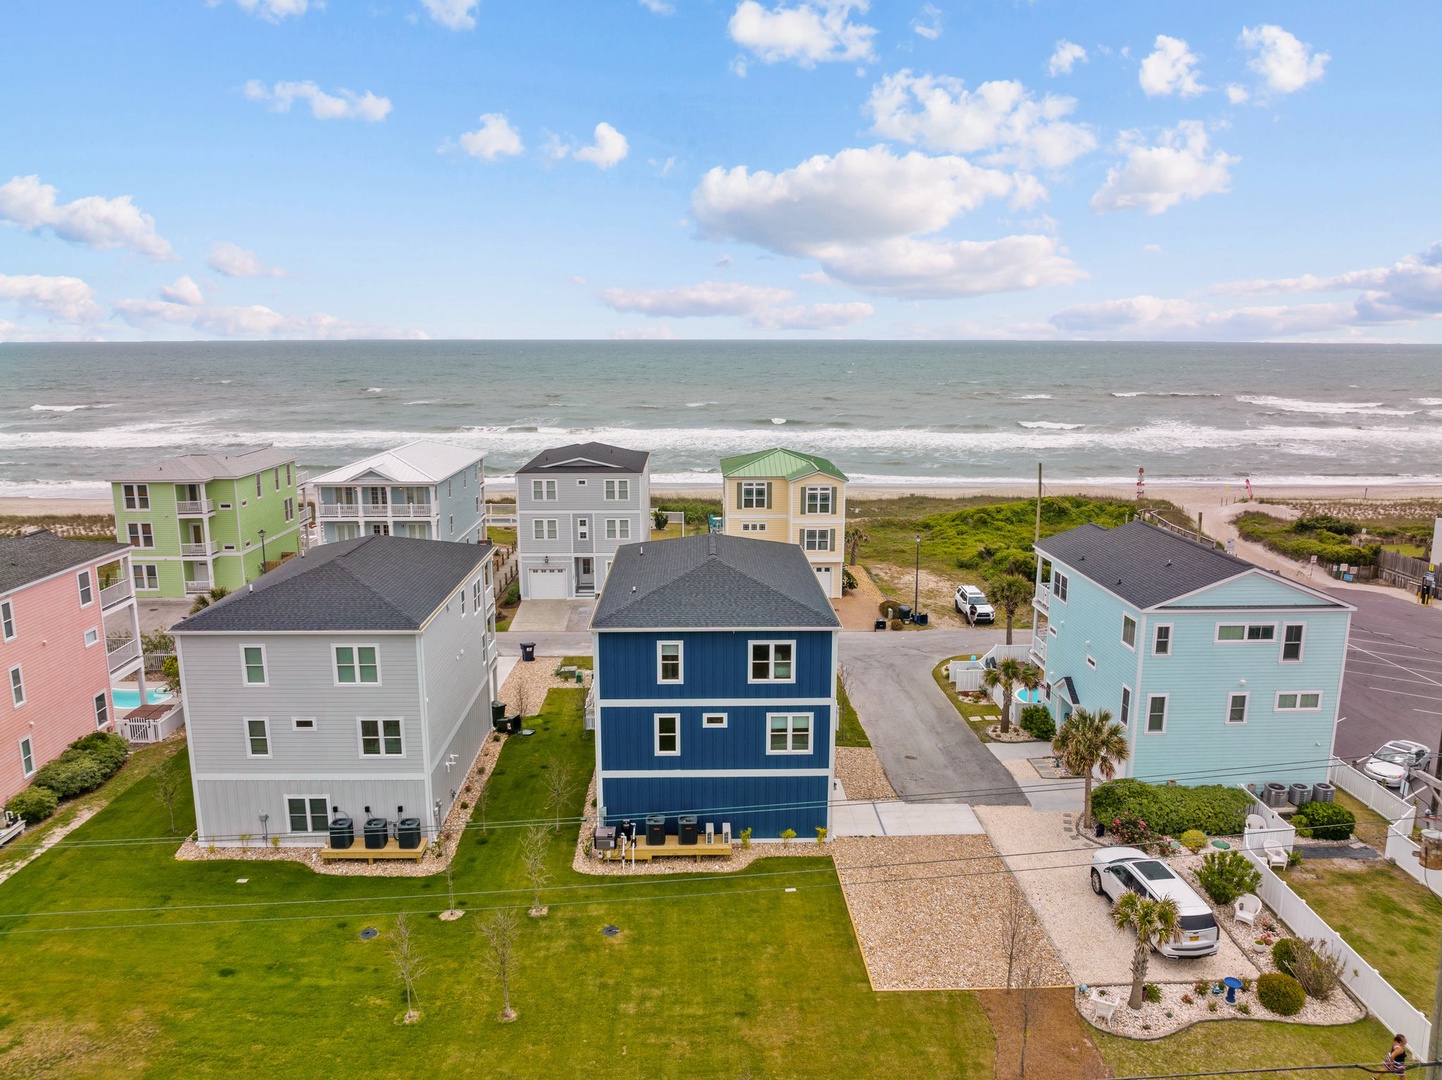 Exterior & View of the Crystal Coast